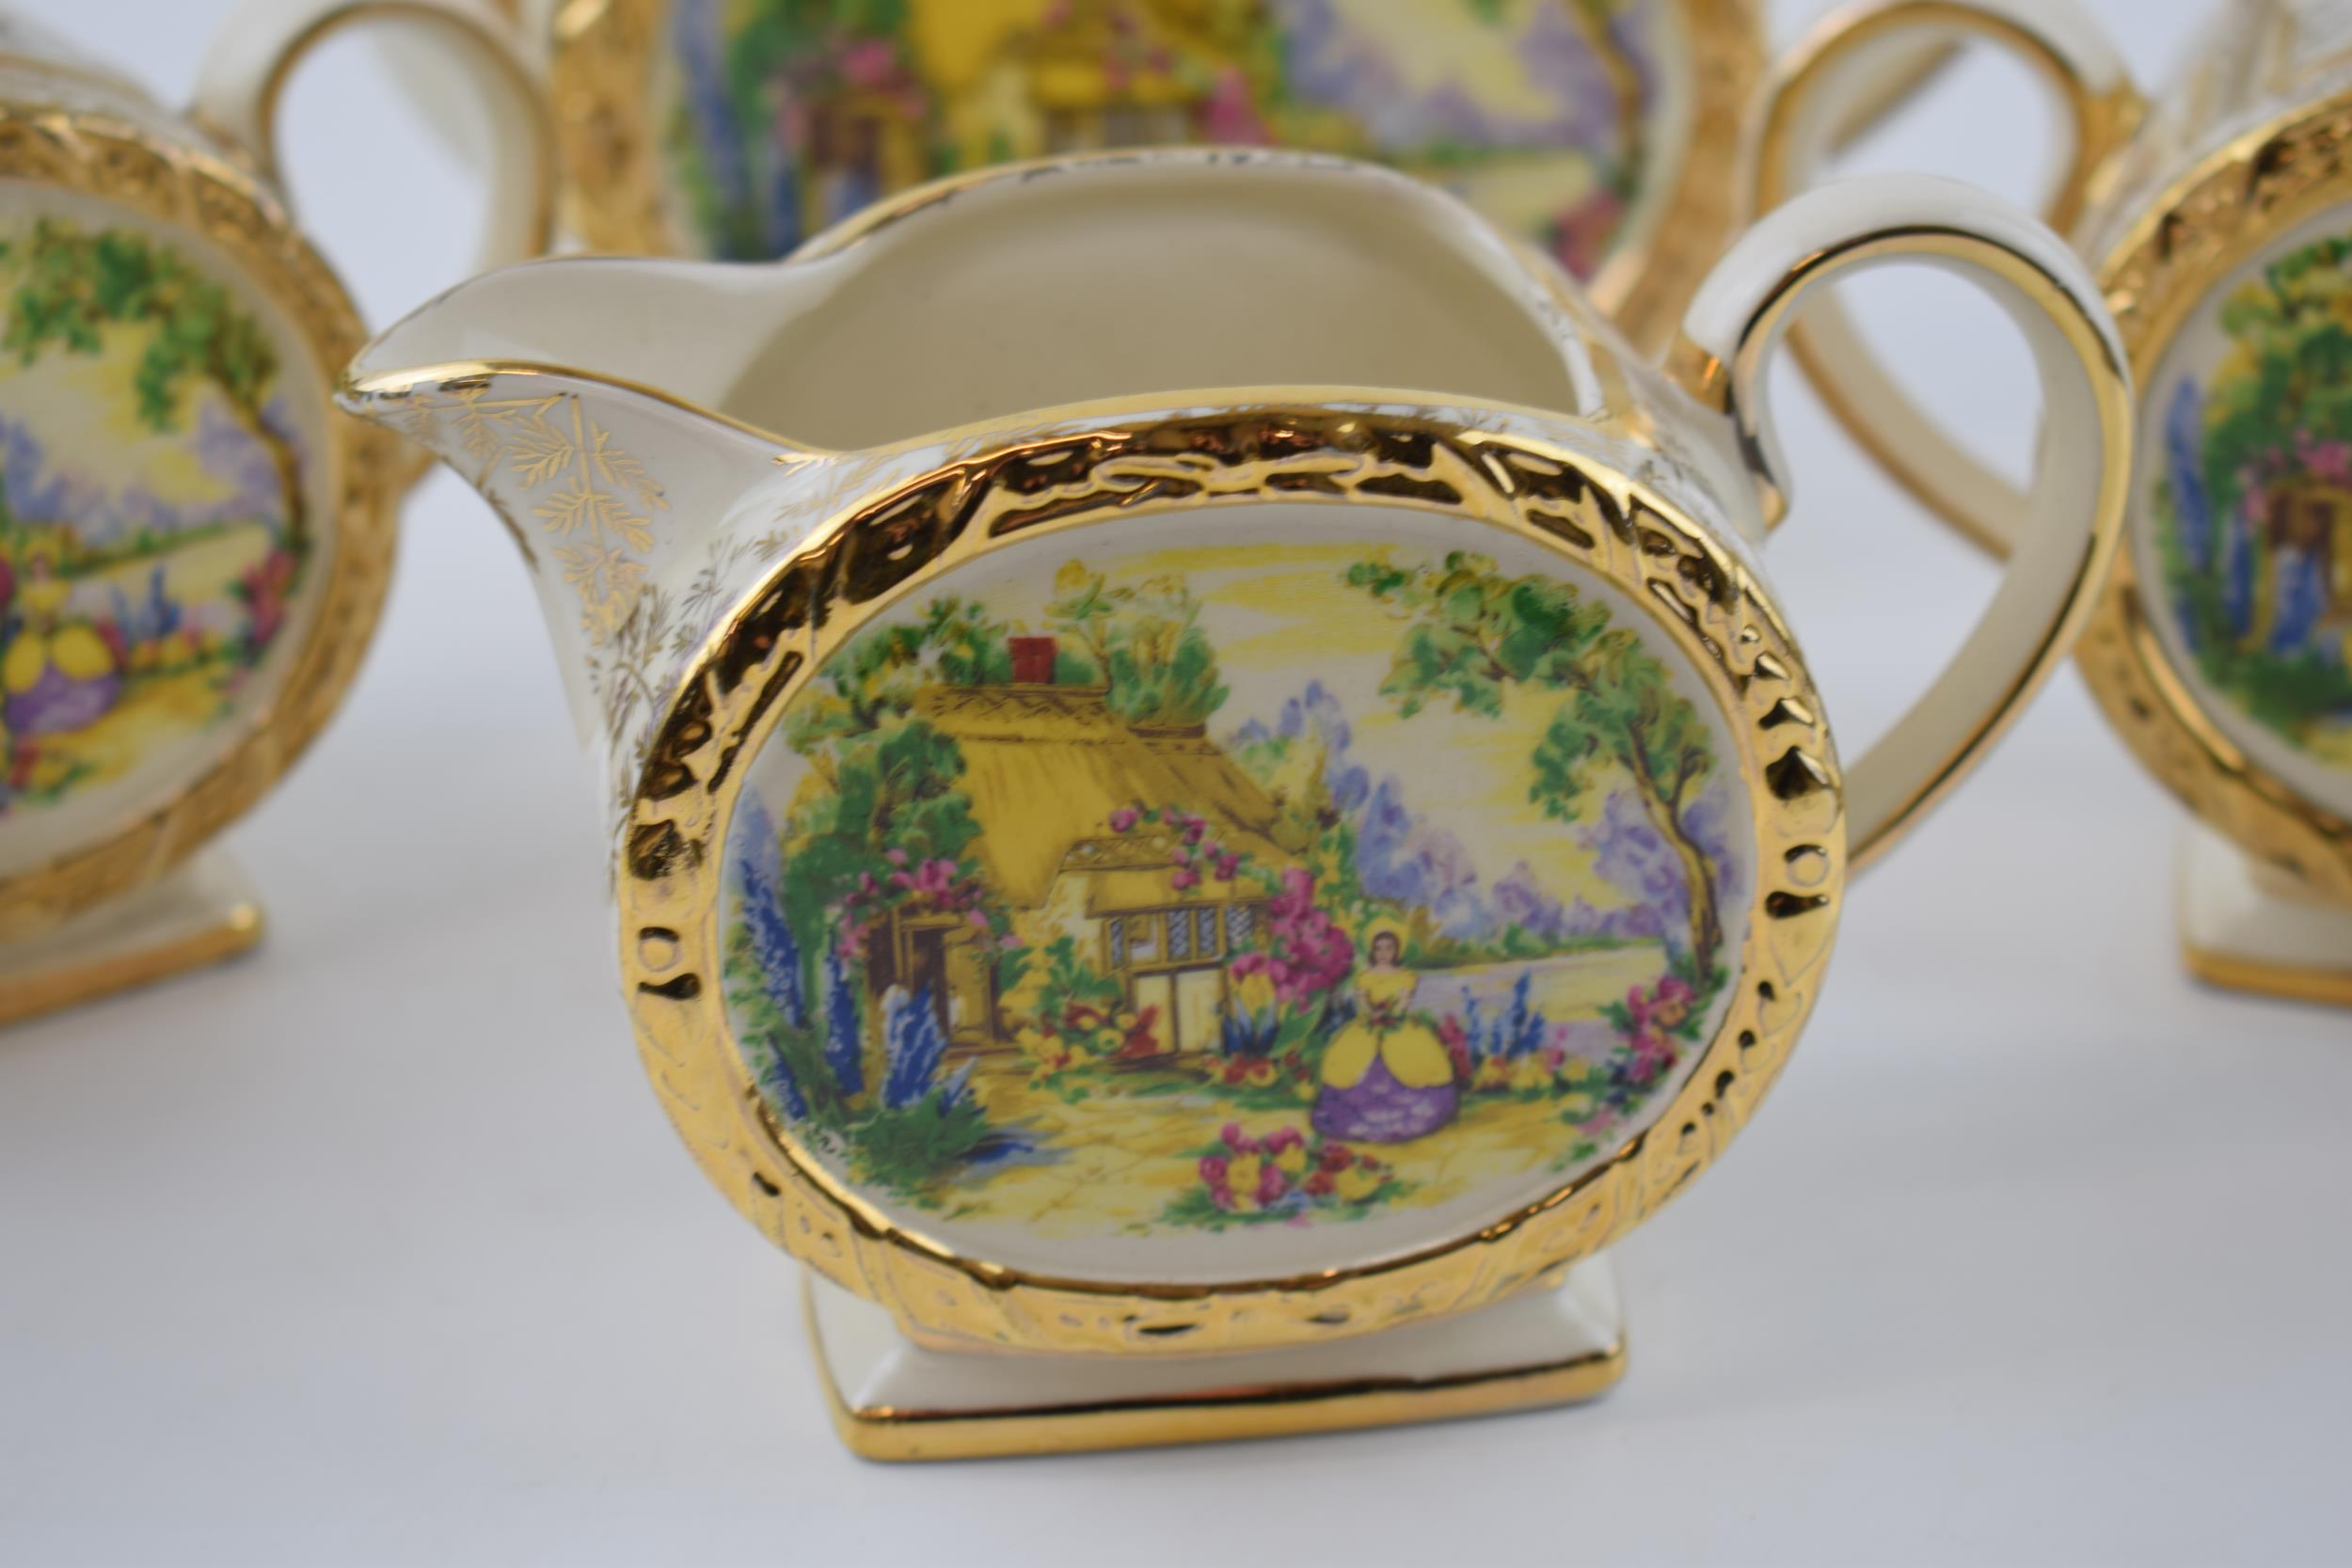 Sadler tea ware in a floral gilt pattern with a cottage scene to include a teapot, 2 lidded sugars - Image 2 of 4